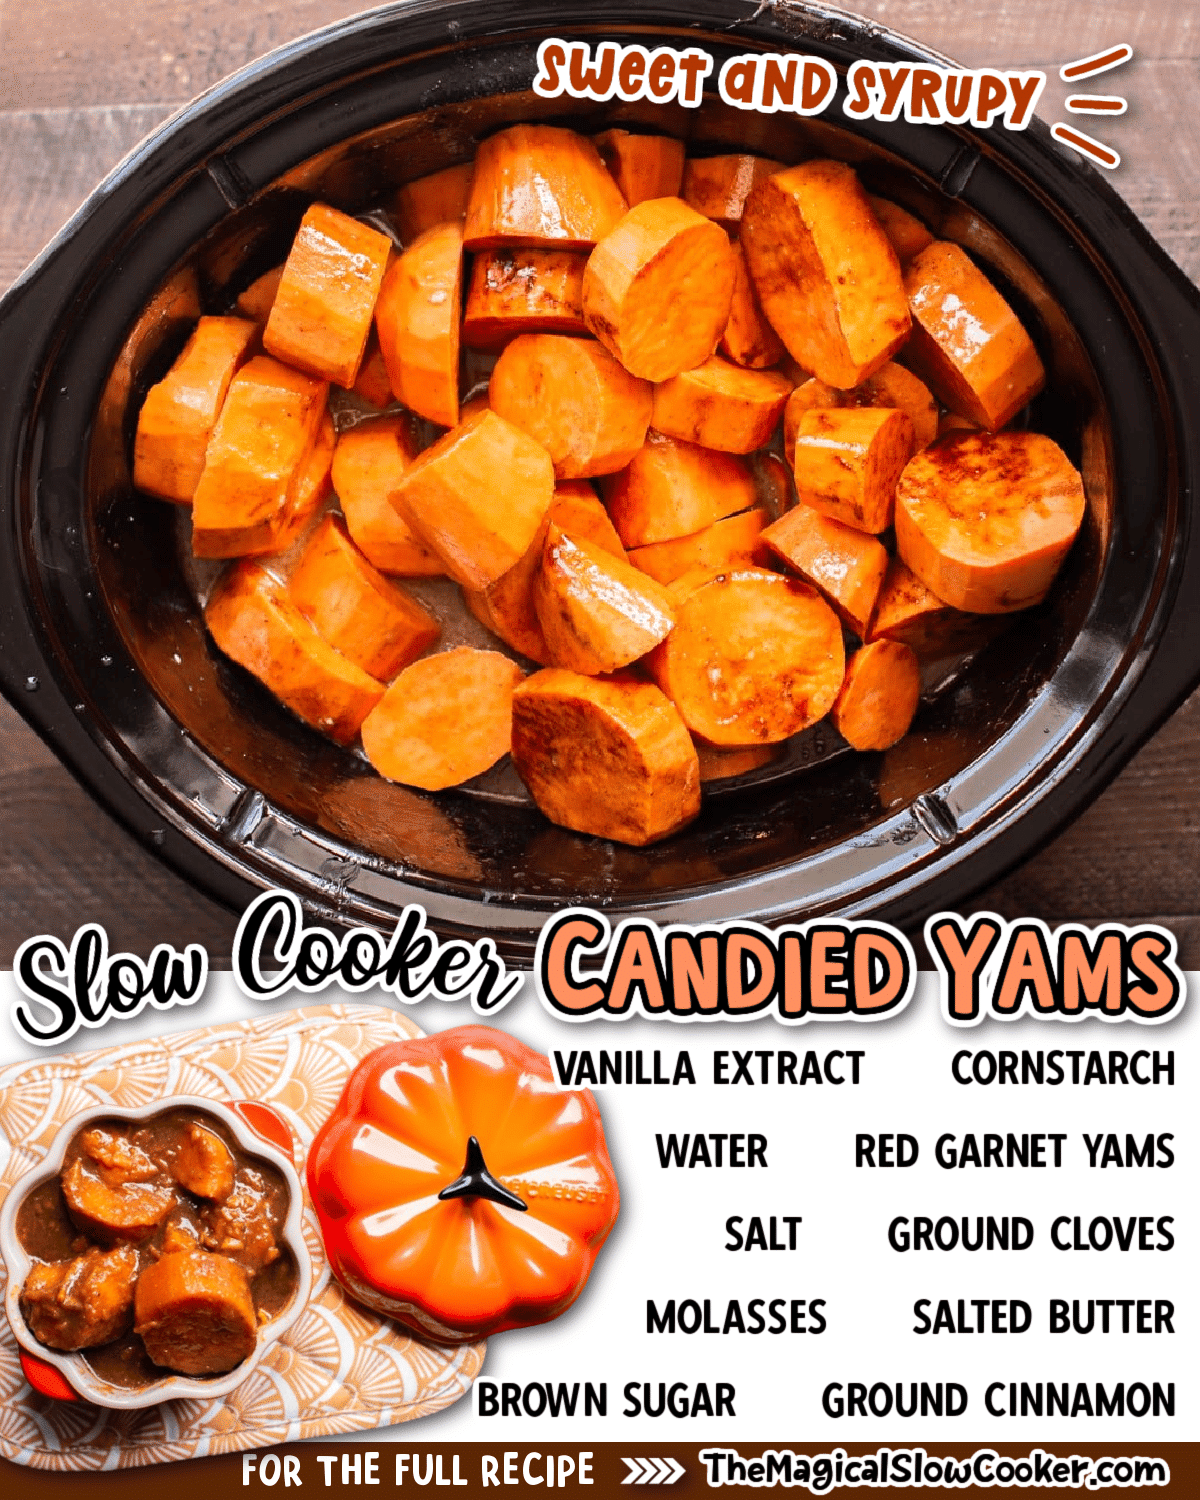 Slow Cooker Candied Yams - The Magical Slow Cooker